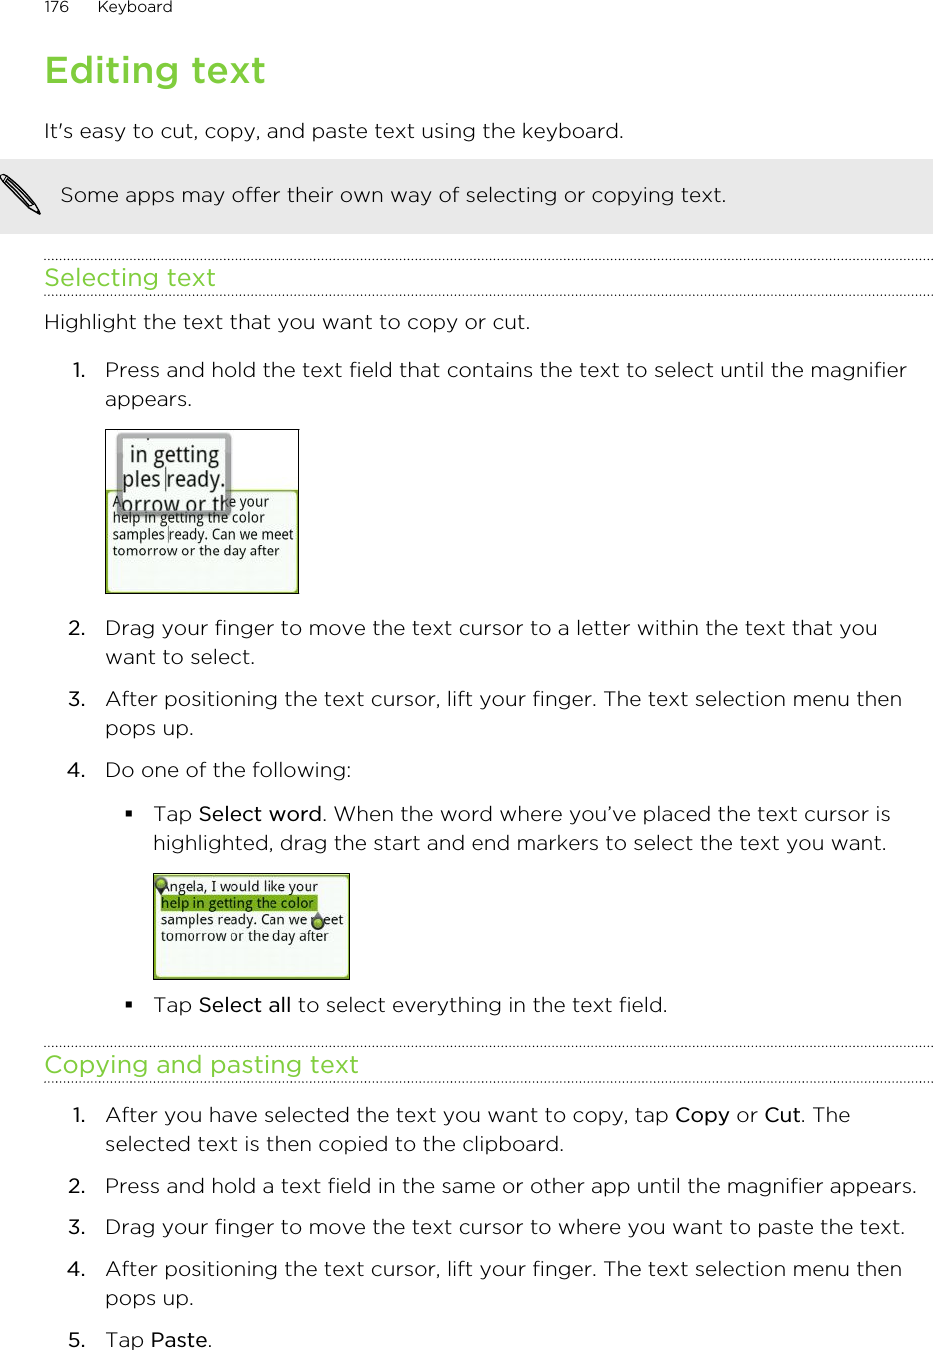 Editing textIt&apos;s easy to cut, copy, and paste text using the keyboard.Some apps may offer their own way of selecting or copying text.Selecting textHighlight the text that you want to copy or cut.1. Press and hold the text field that contains the text to select until the magnifierappears. 2. Drag your finger to move the text cursor to a letter within the text that youwant to select.3. After positioning the text cursor, lift your finger. The text selection menu thenpops up.4. Do one of the following:§Tap Select word. When the word where you’ve placed the text cursor ishighlighted, drag the start and end markers to select the text you want.§Tap Select all to select everything in the text field.Copying and pasting text1. After you have selected the text you want to copy, tap Copy or Cut. Theselected text is then copied to the clipboard.2. Press and hold a text field in the same or other app until the magnifier appears.3. Drag your finger to move the text cursor to where you want to paste the text.4. After positioning the text cursor, lift your finger. The text selection menu thenpops up.5. Tap Paste.176 Keyboard